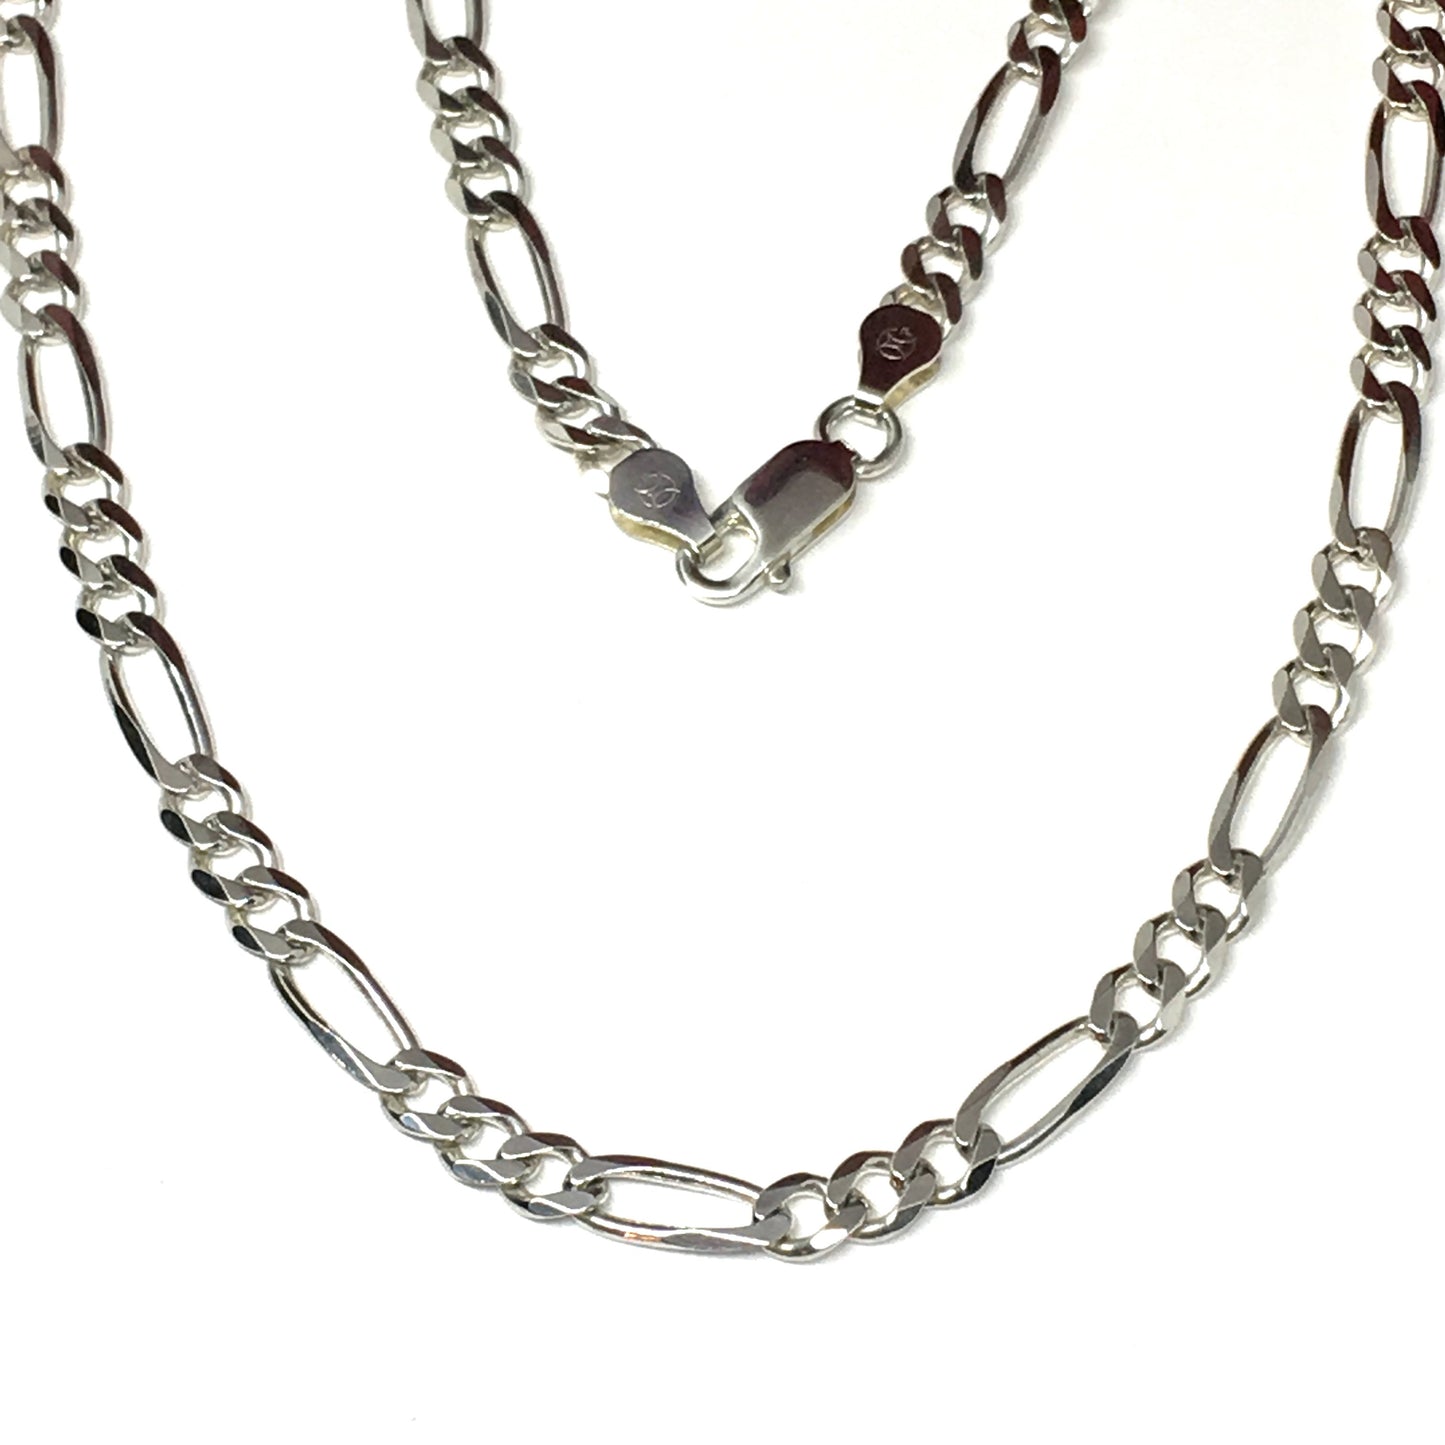 Necklace - Mens Womens Sterling Silver Necklace - 16 Inch Necklace - 5mm Figaro Chain Necklace